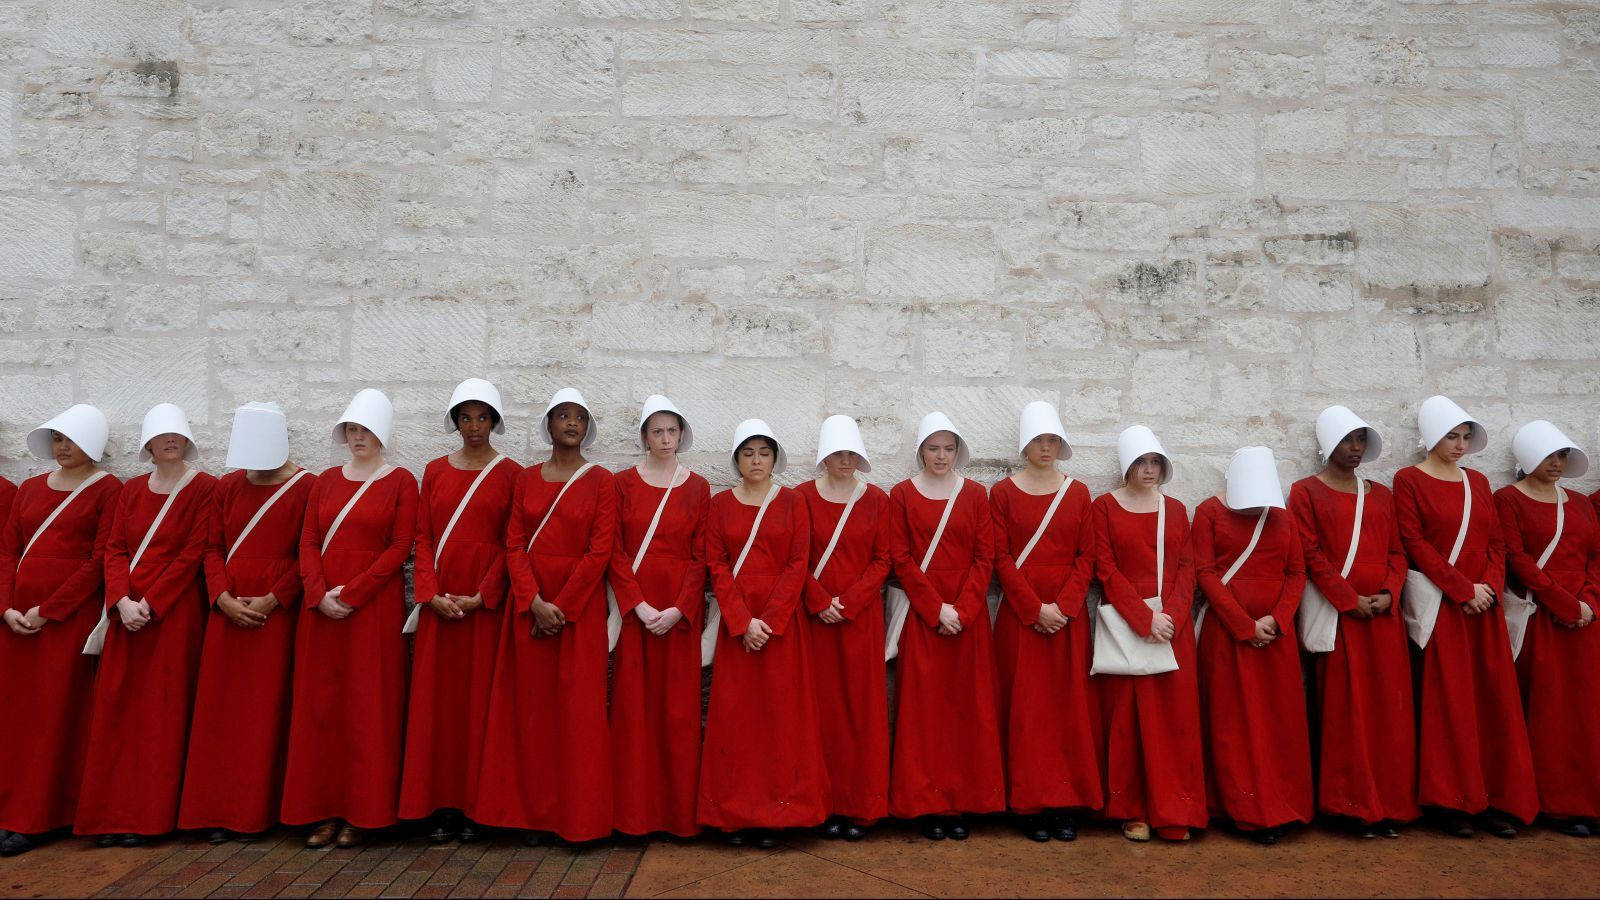 Halloween Costumes For The Handmaid's Tale Wallpaper